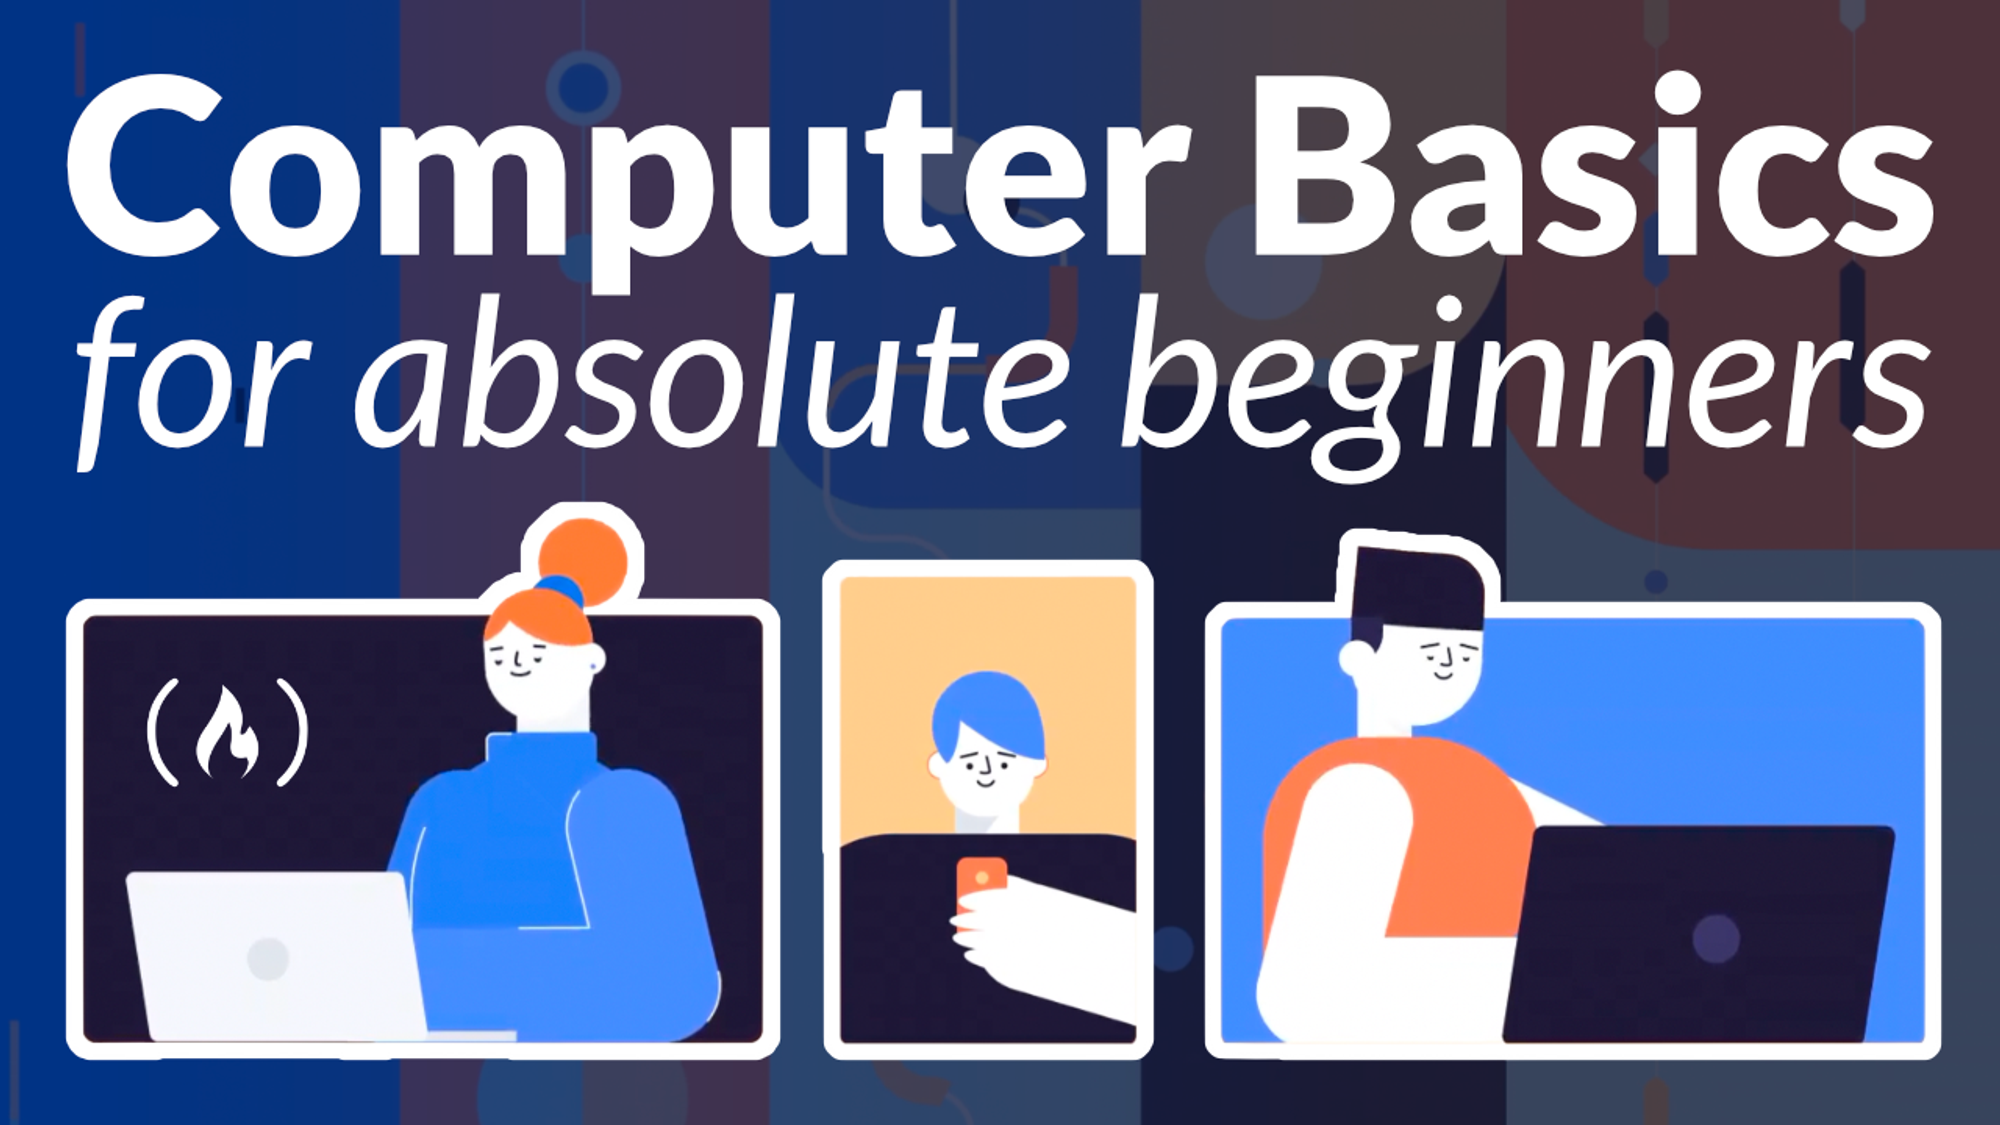 Computer Basics for absolute beginners - FreeCodeCamp